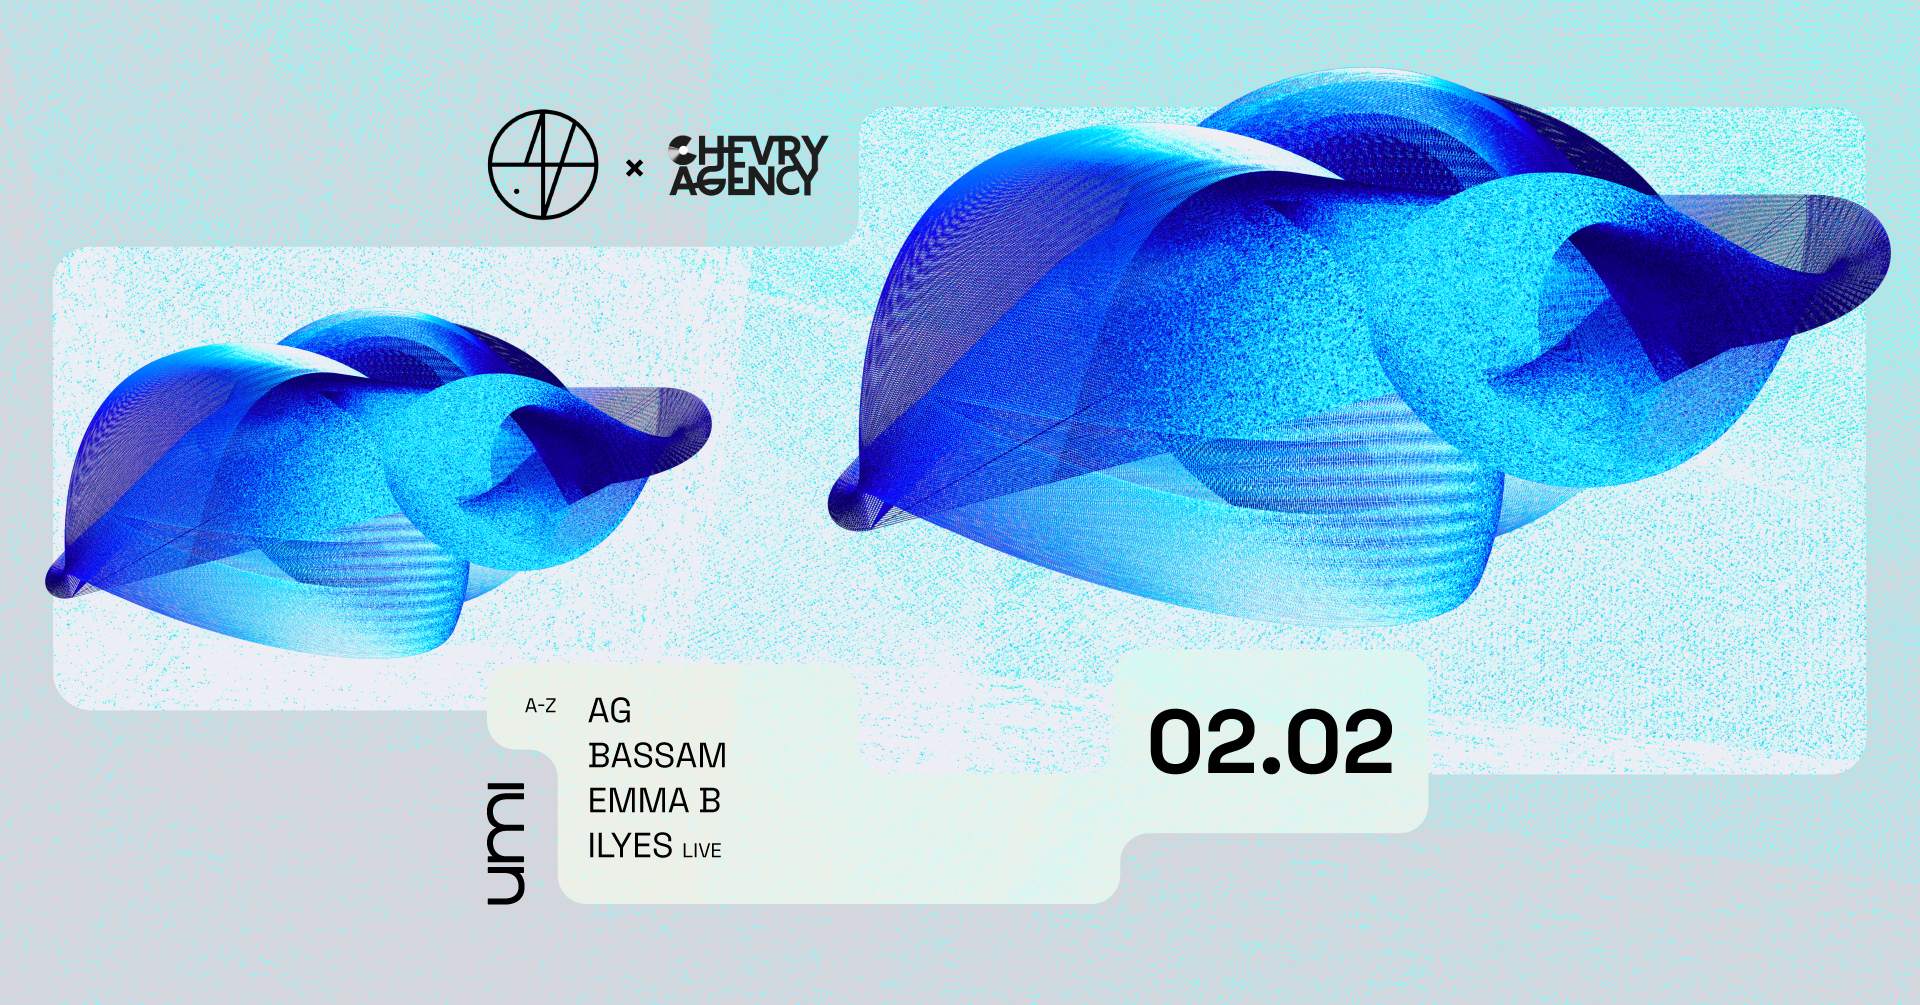 UMI x The Void Project x Chevry Agency with Emma B, Bassam, ILyes (live) & AG - フライヤー表